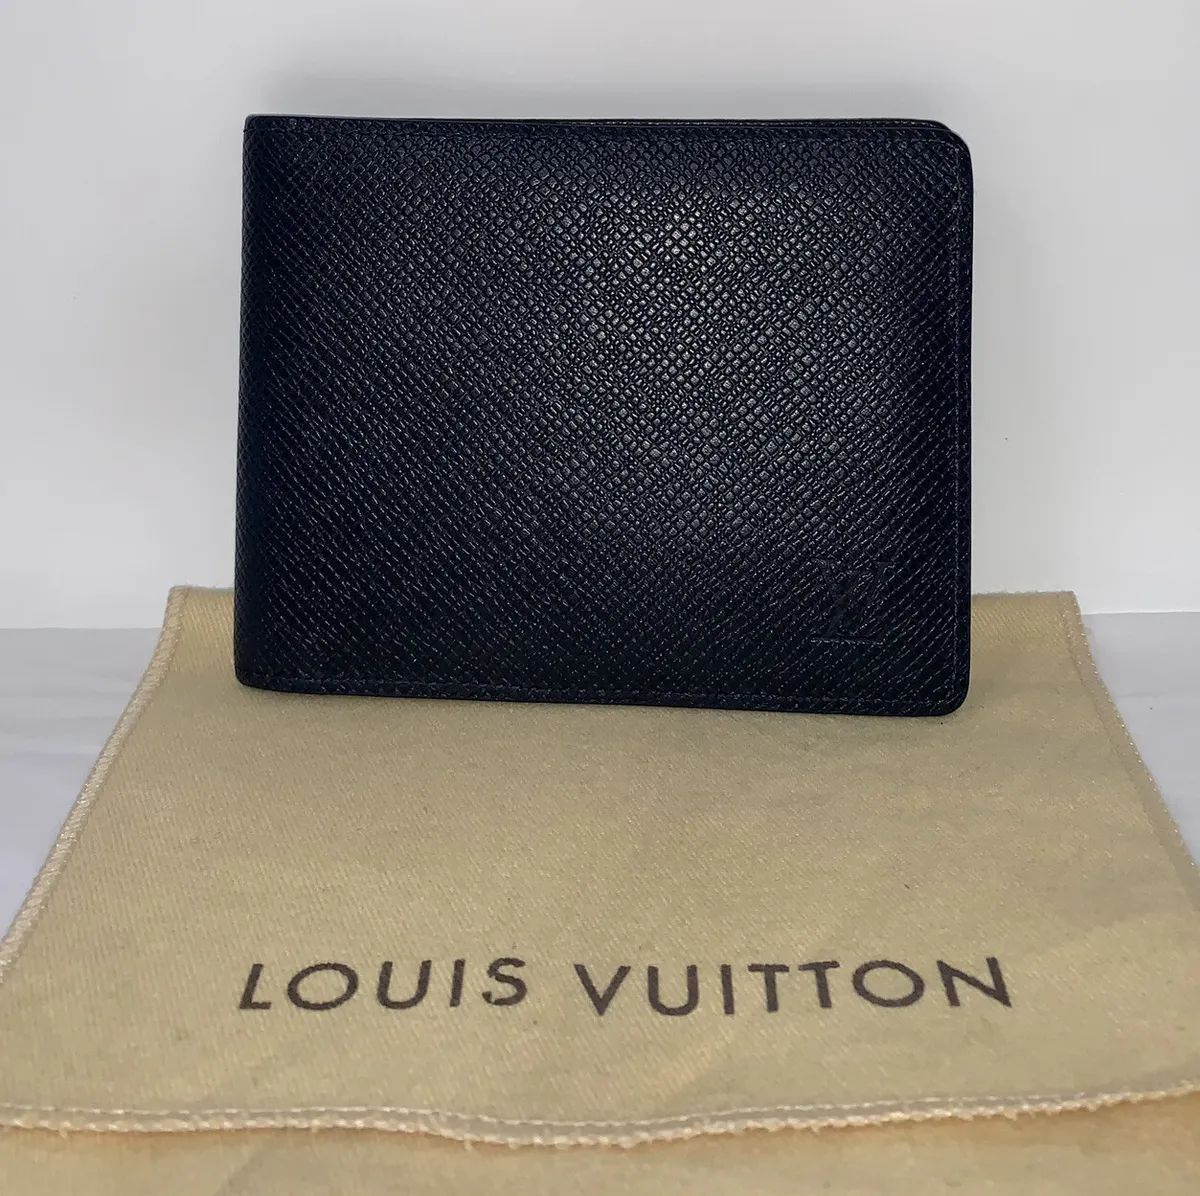 Louis Vuitton Multiple Wallet Taiga Leather Blue Marine SOLD-OUT! AUTHENTIC  💙